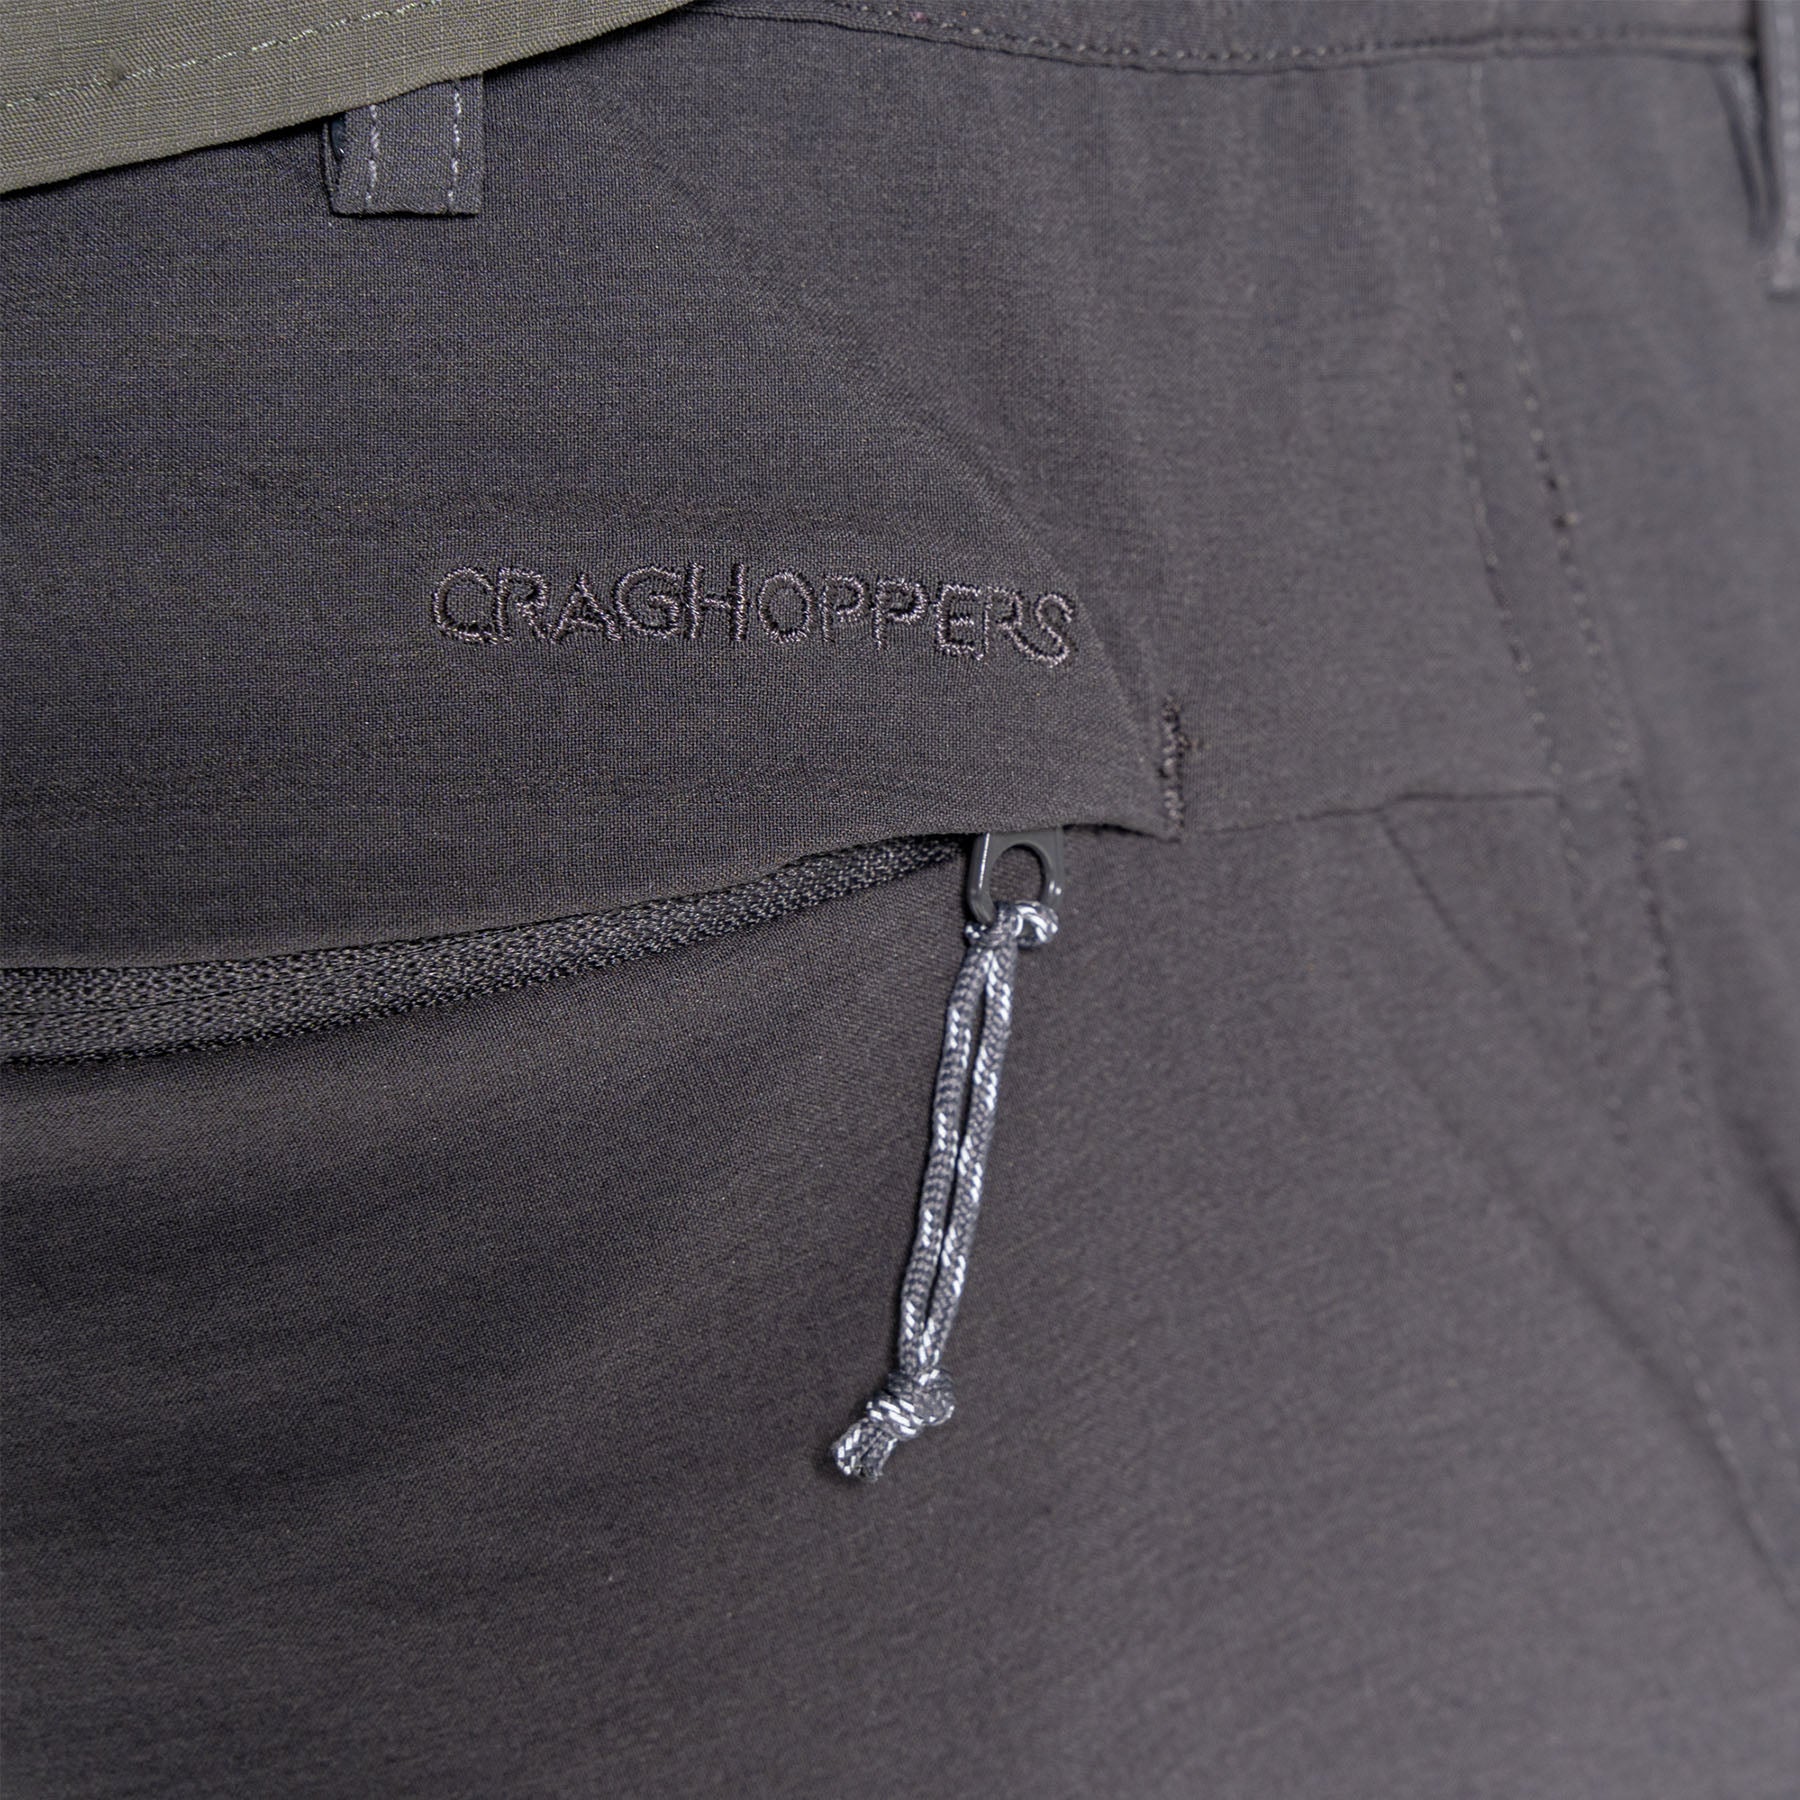 craghoppers black classic walking trousers